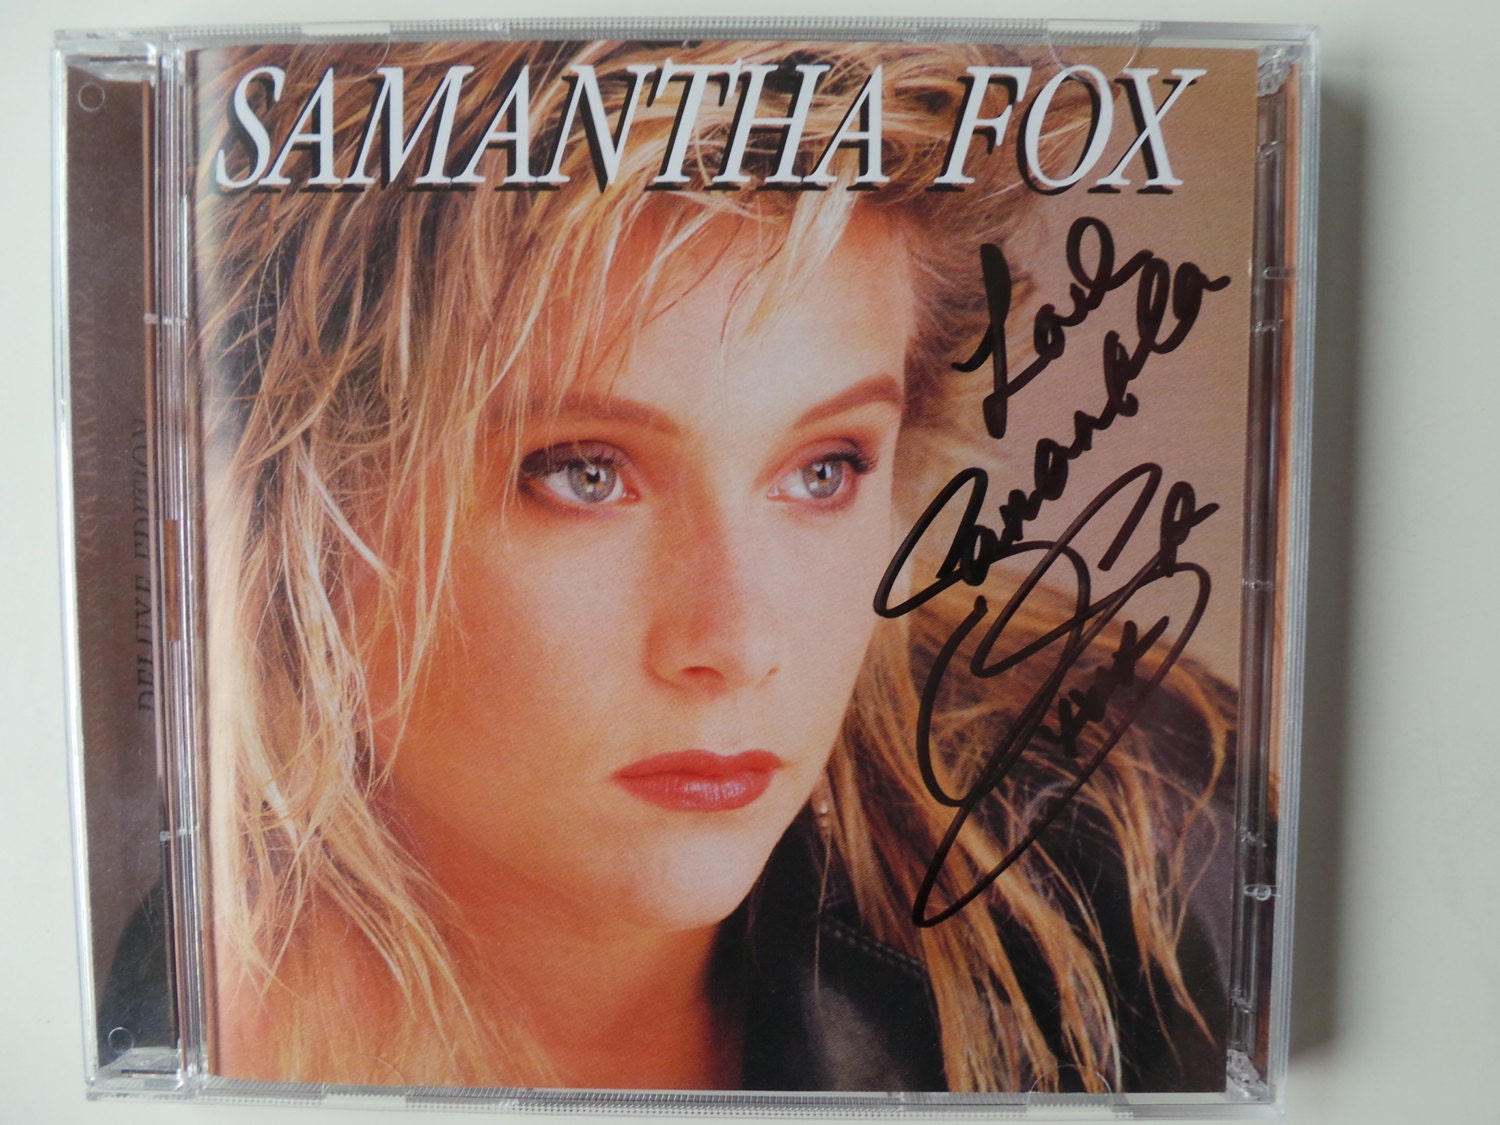 Samantha Fox Autographed And Obtained In By Memorabiliaworld 